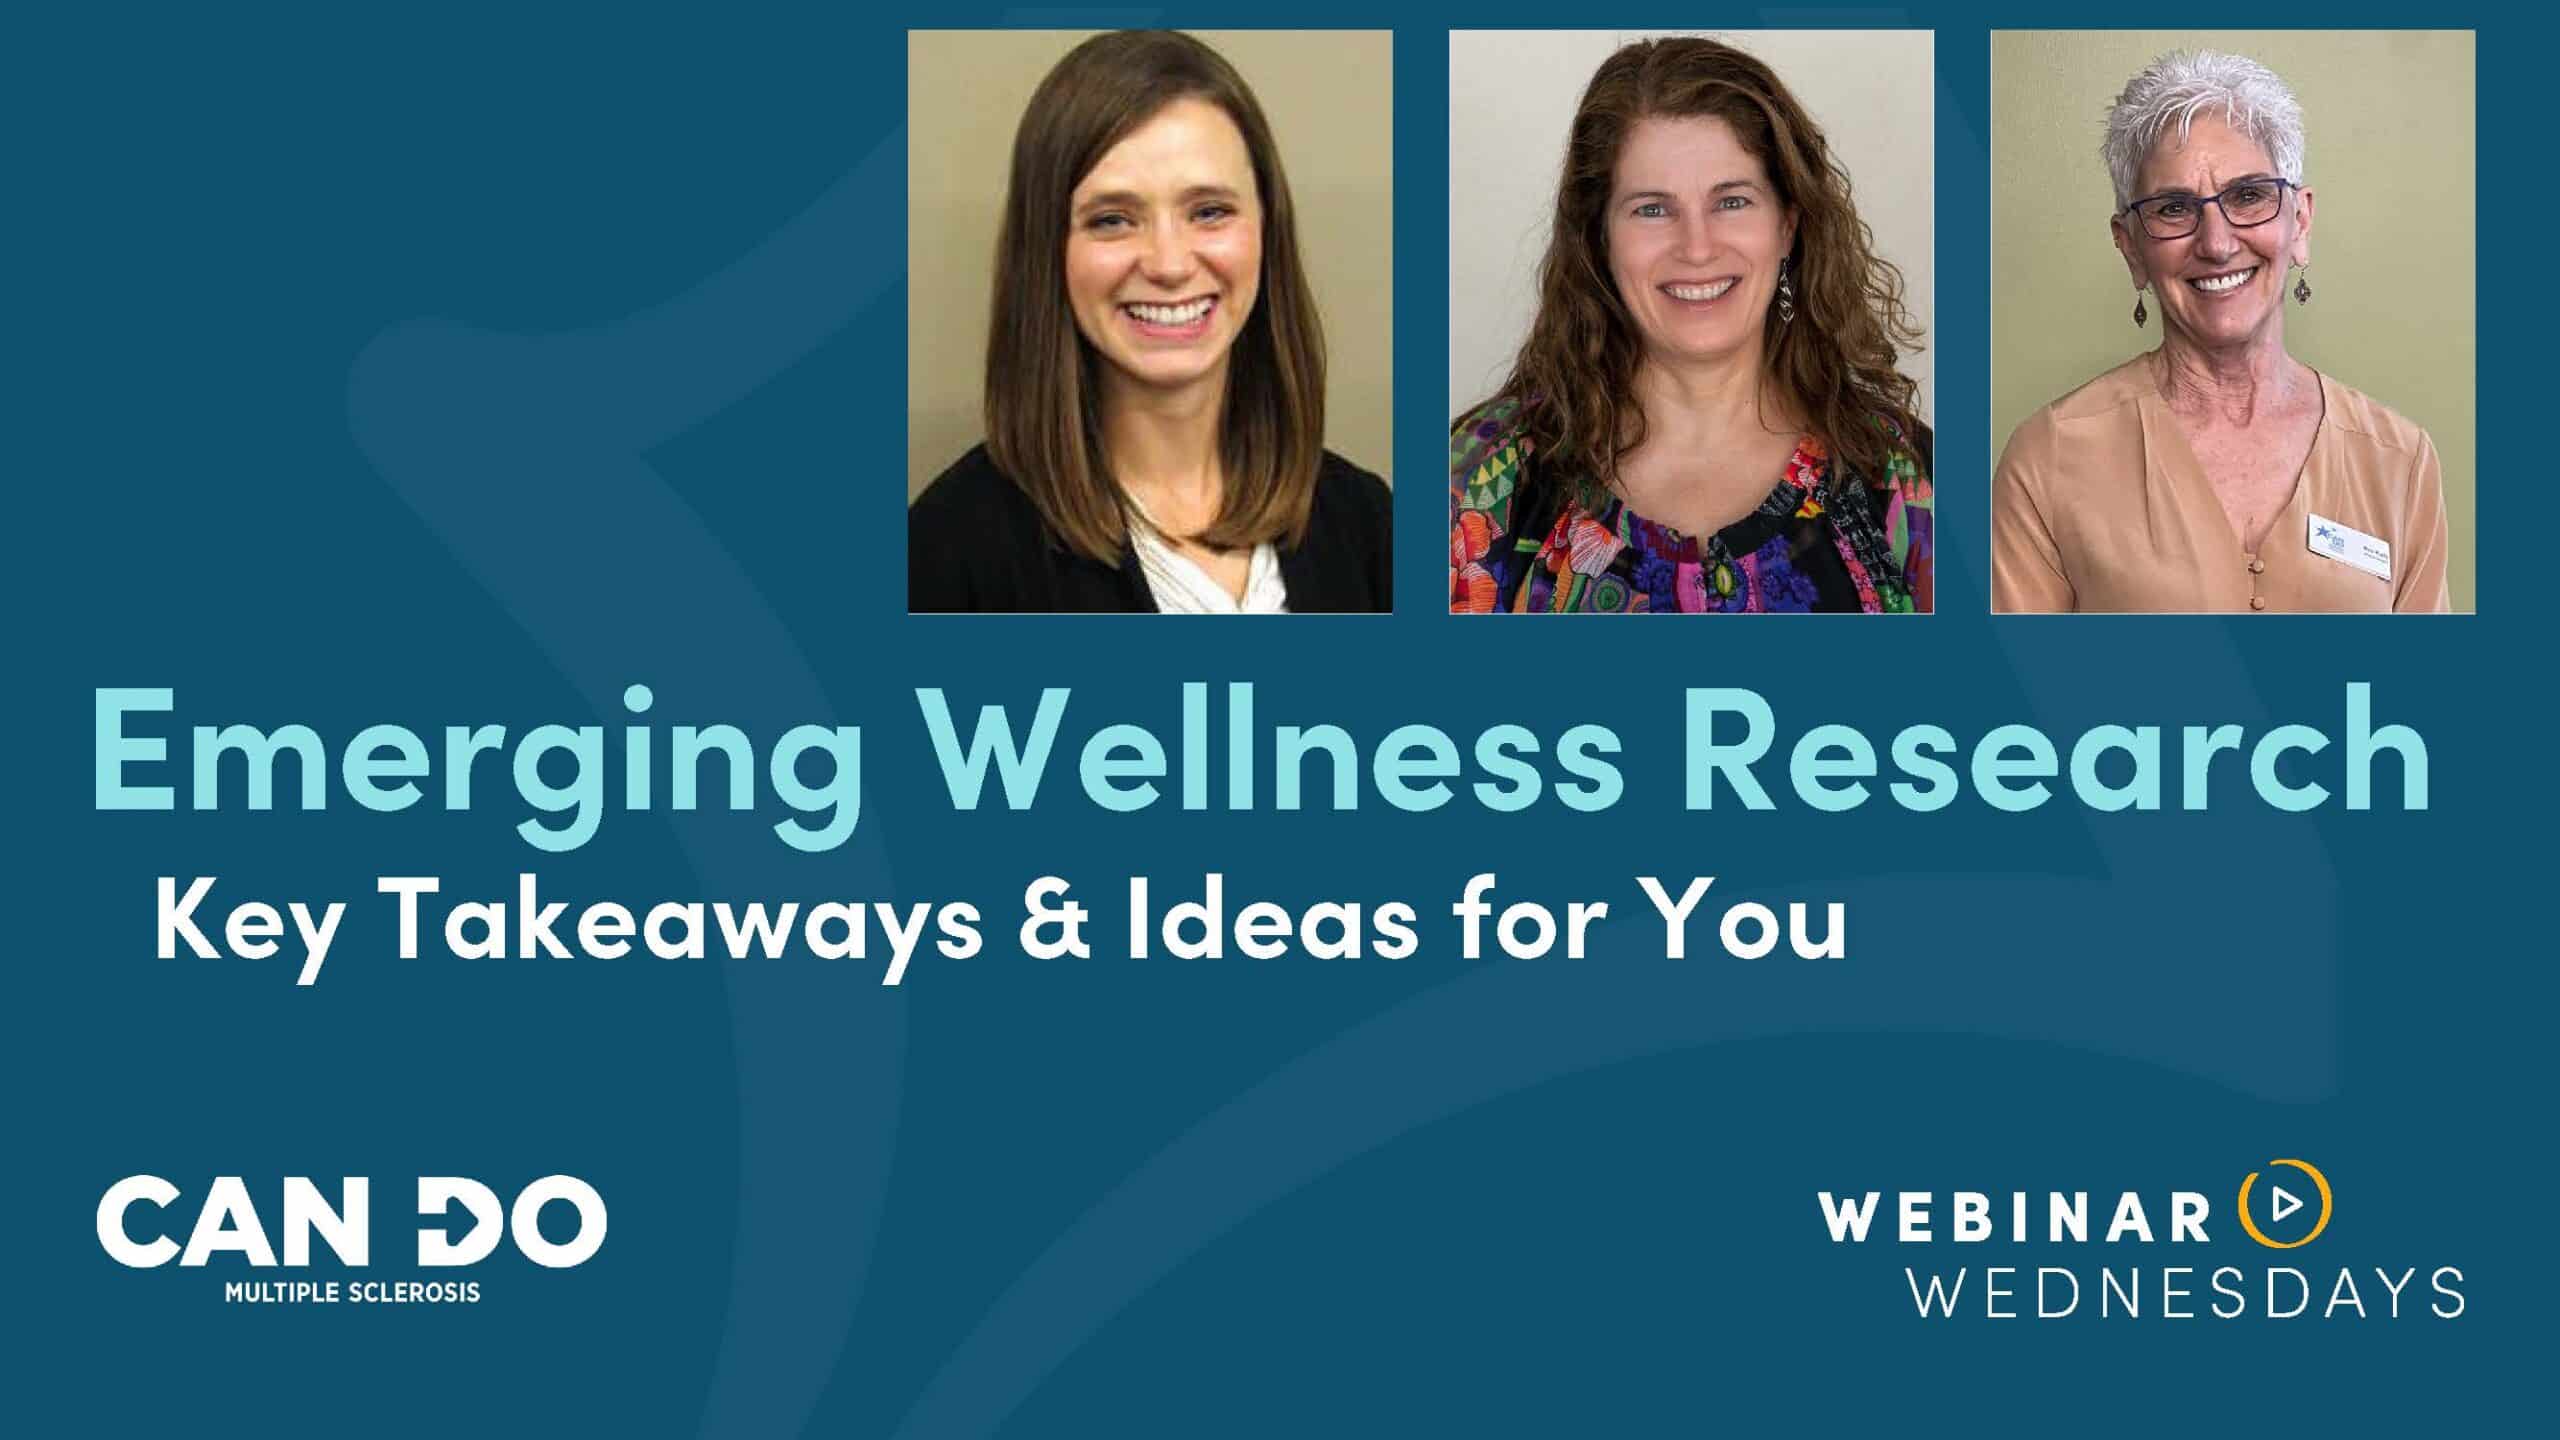 2021 December Webinar - Emerging Wellness Research and Key Takeaways for You